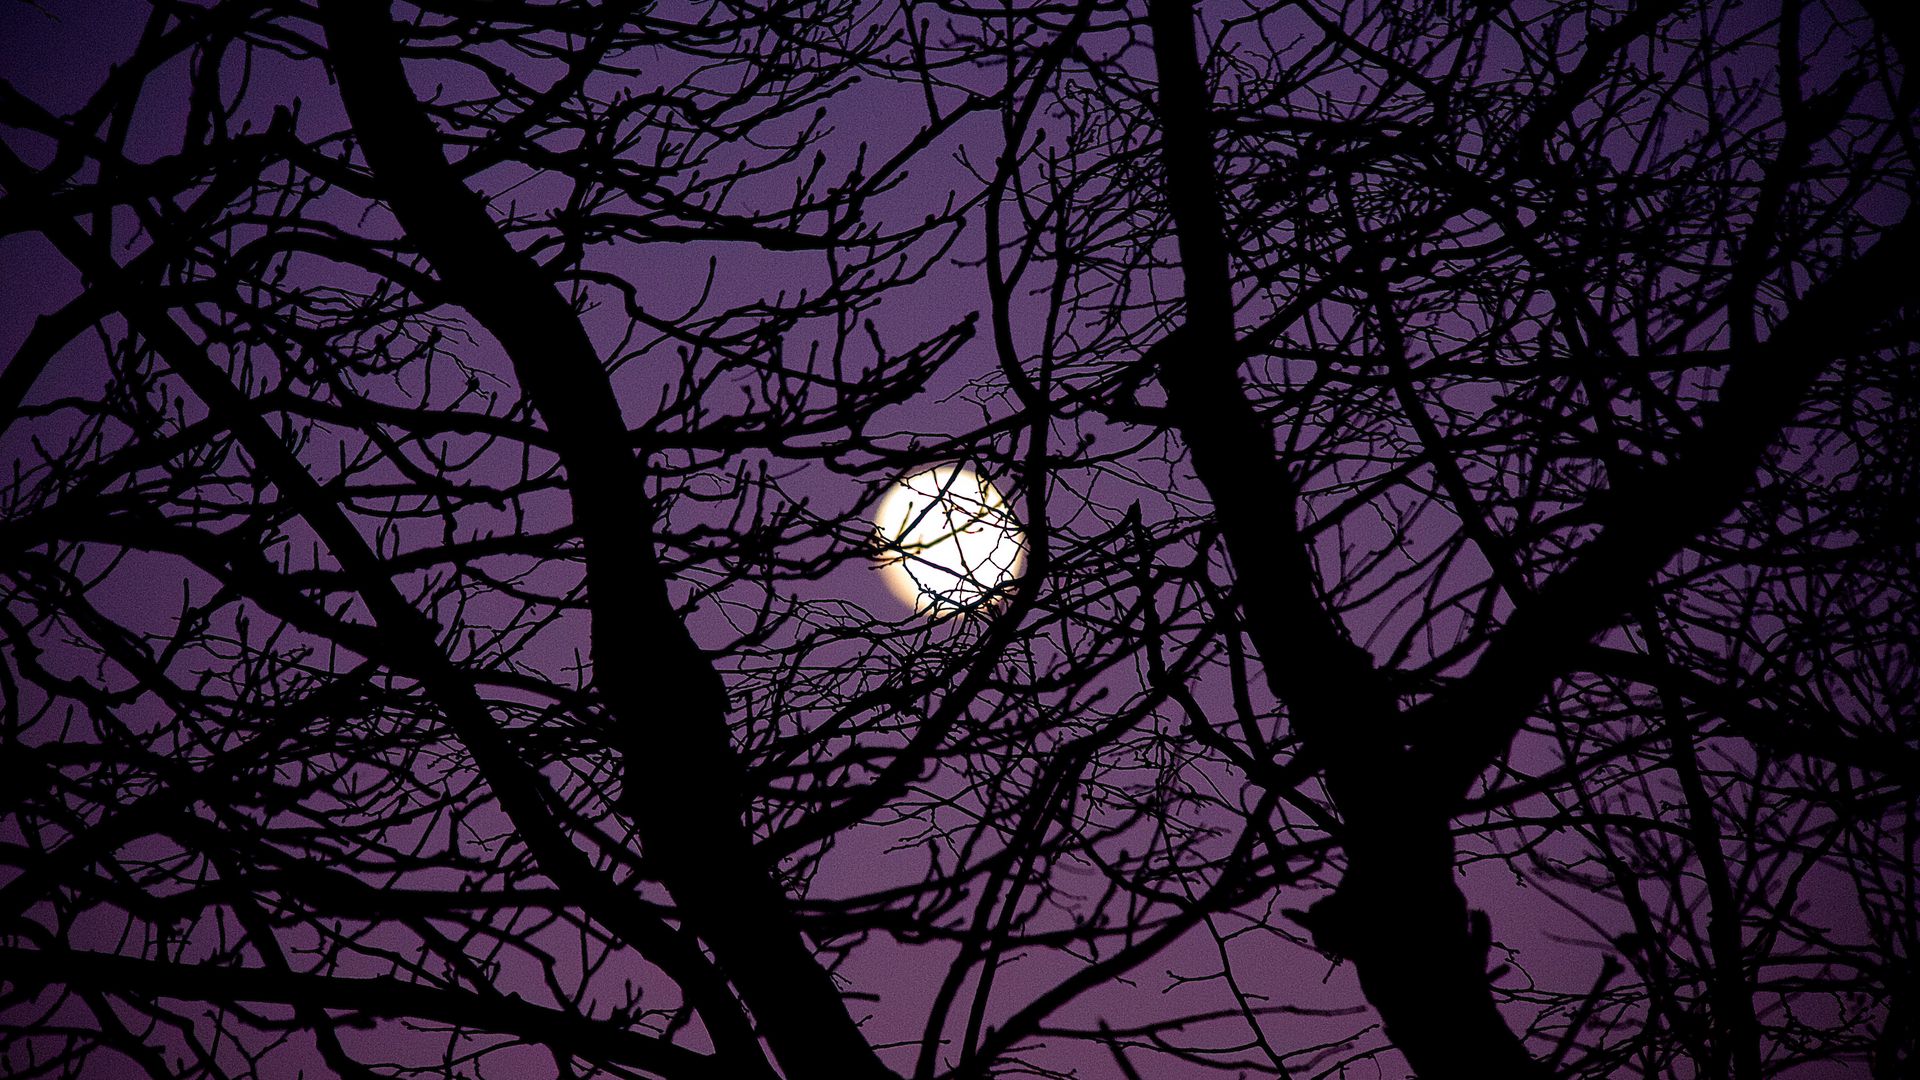 A full moon is seen through the branches of trees - Moon